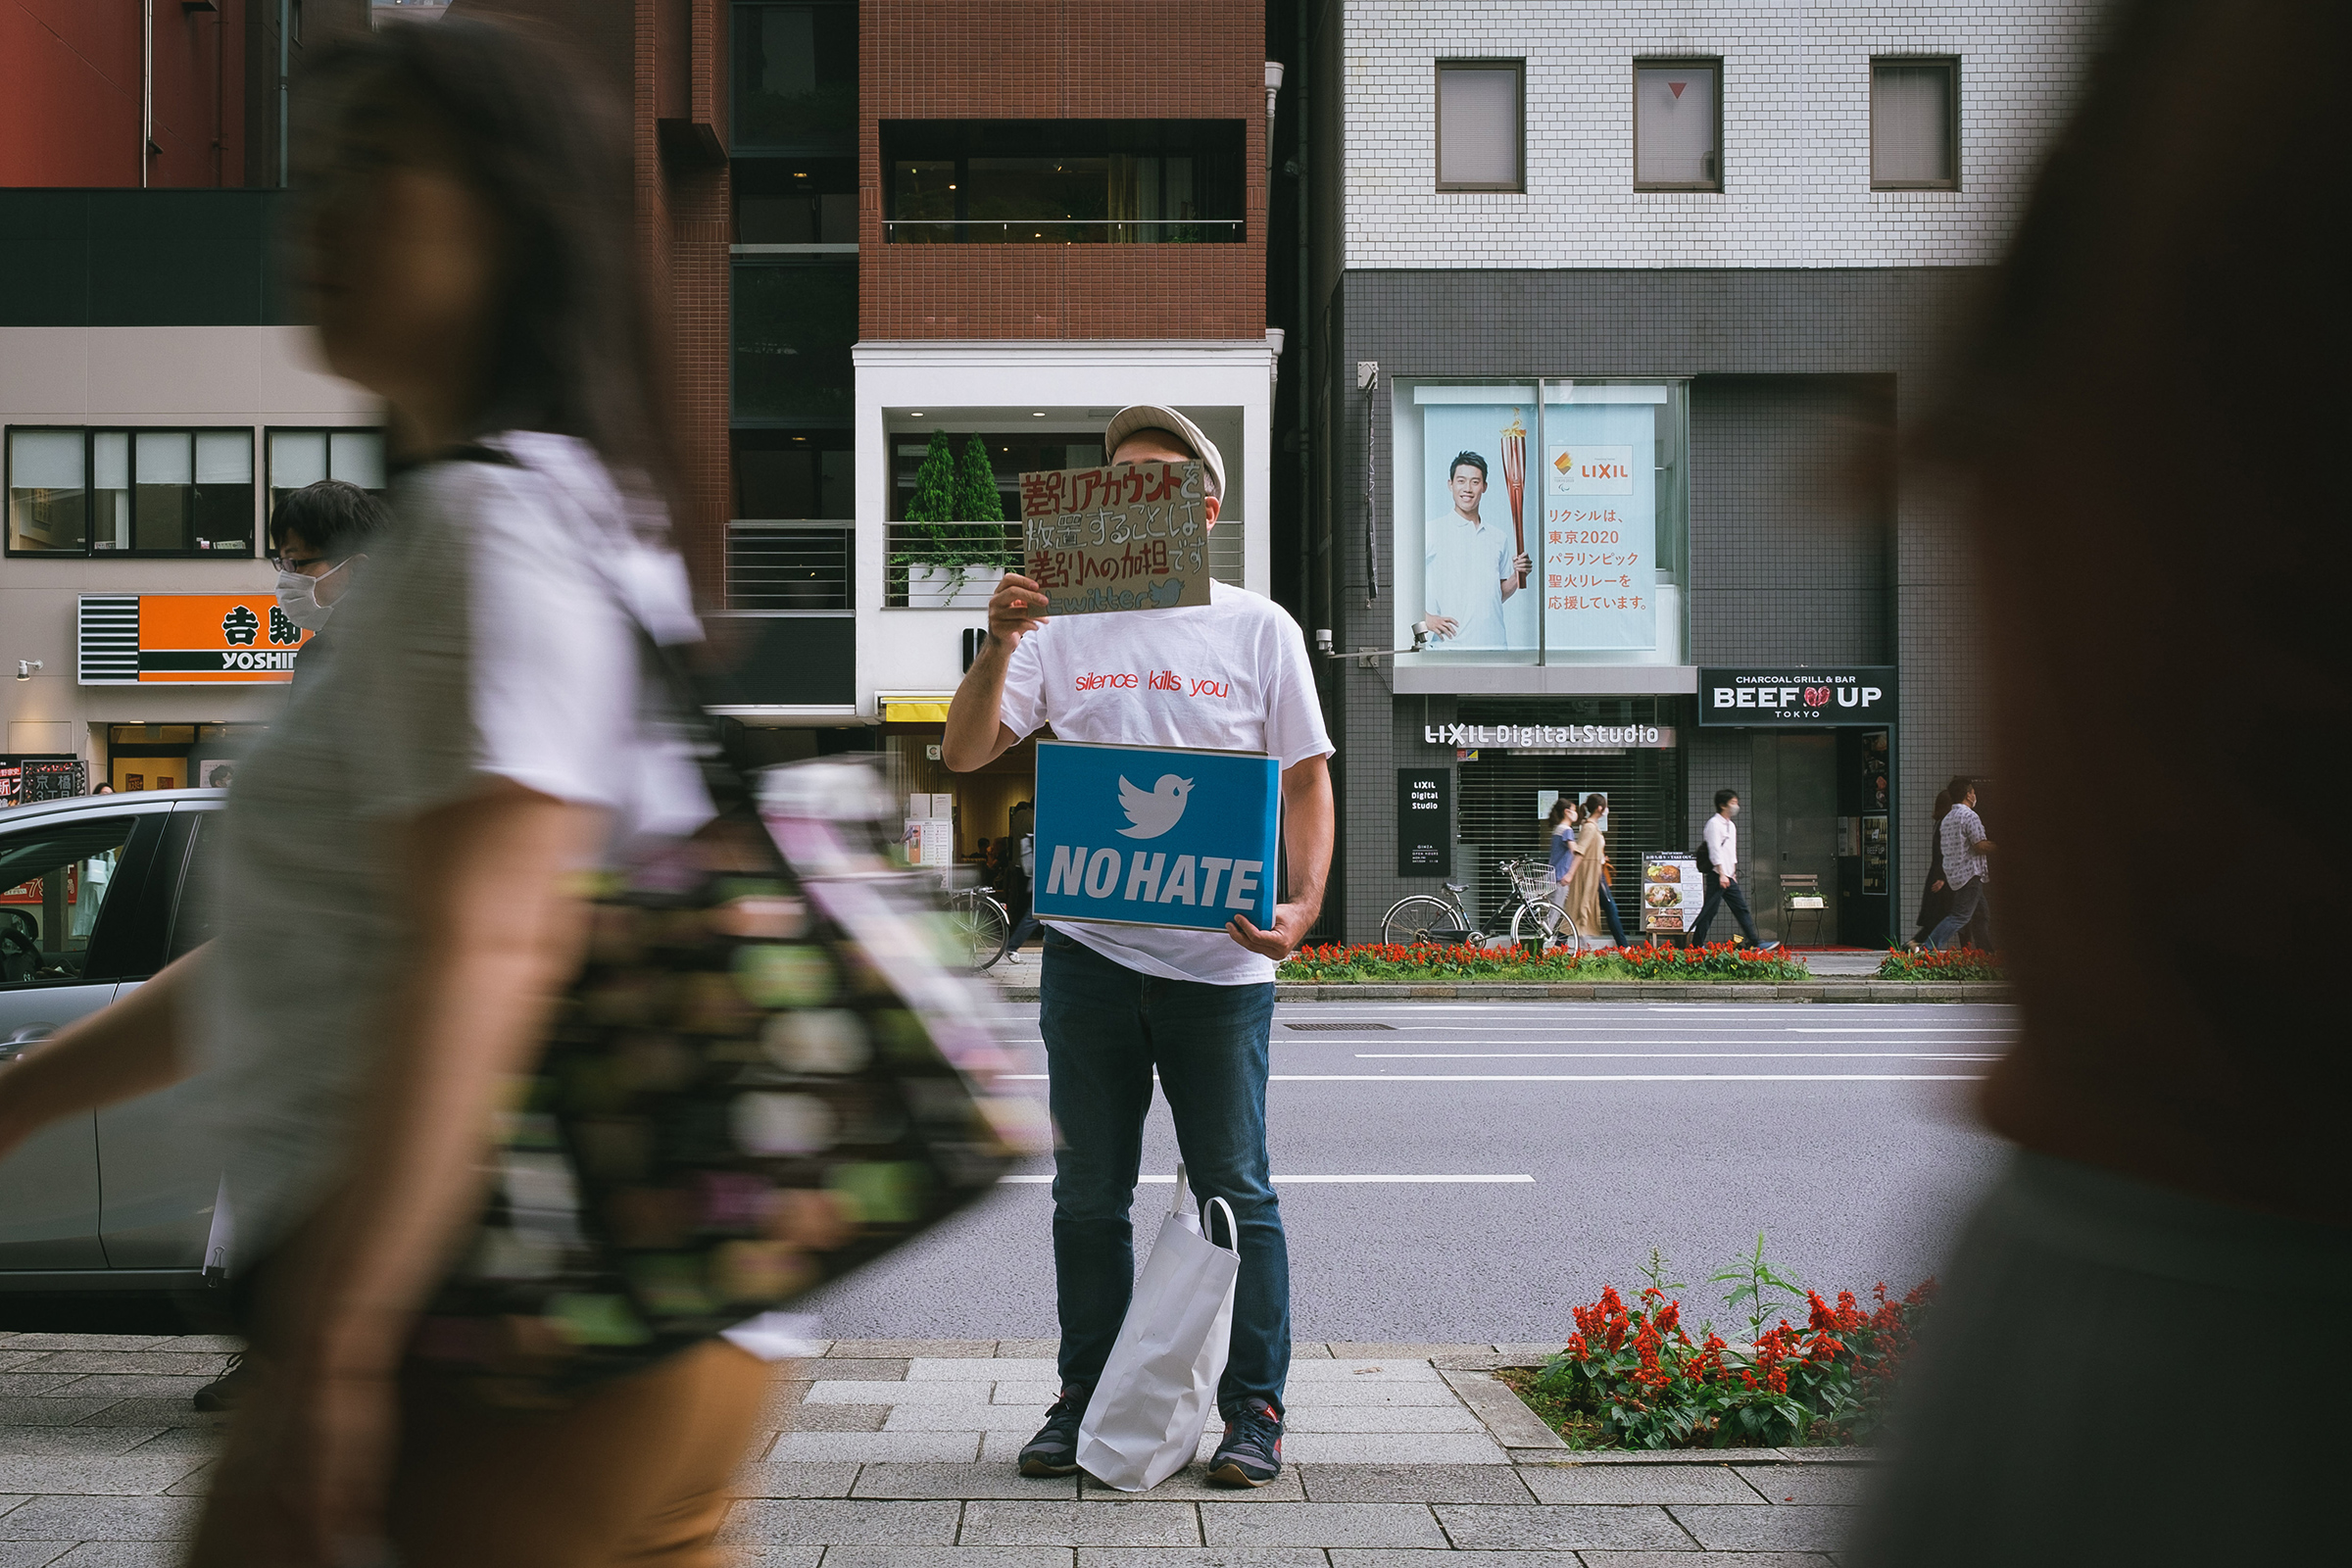 People gather in front of Twitter Japan headquarters in Tokyo to pressure the company to be more active against hate speech and discrimination on the platform, June 6, 2020. (Nicolas Datiche—AFLO/Reuters)